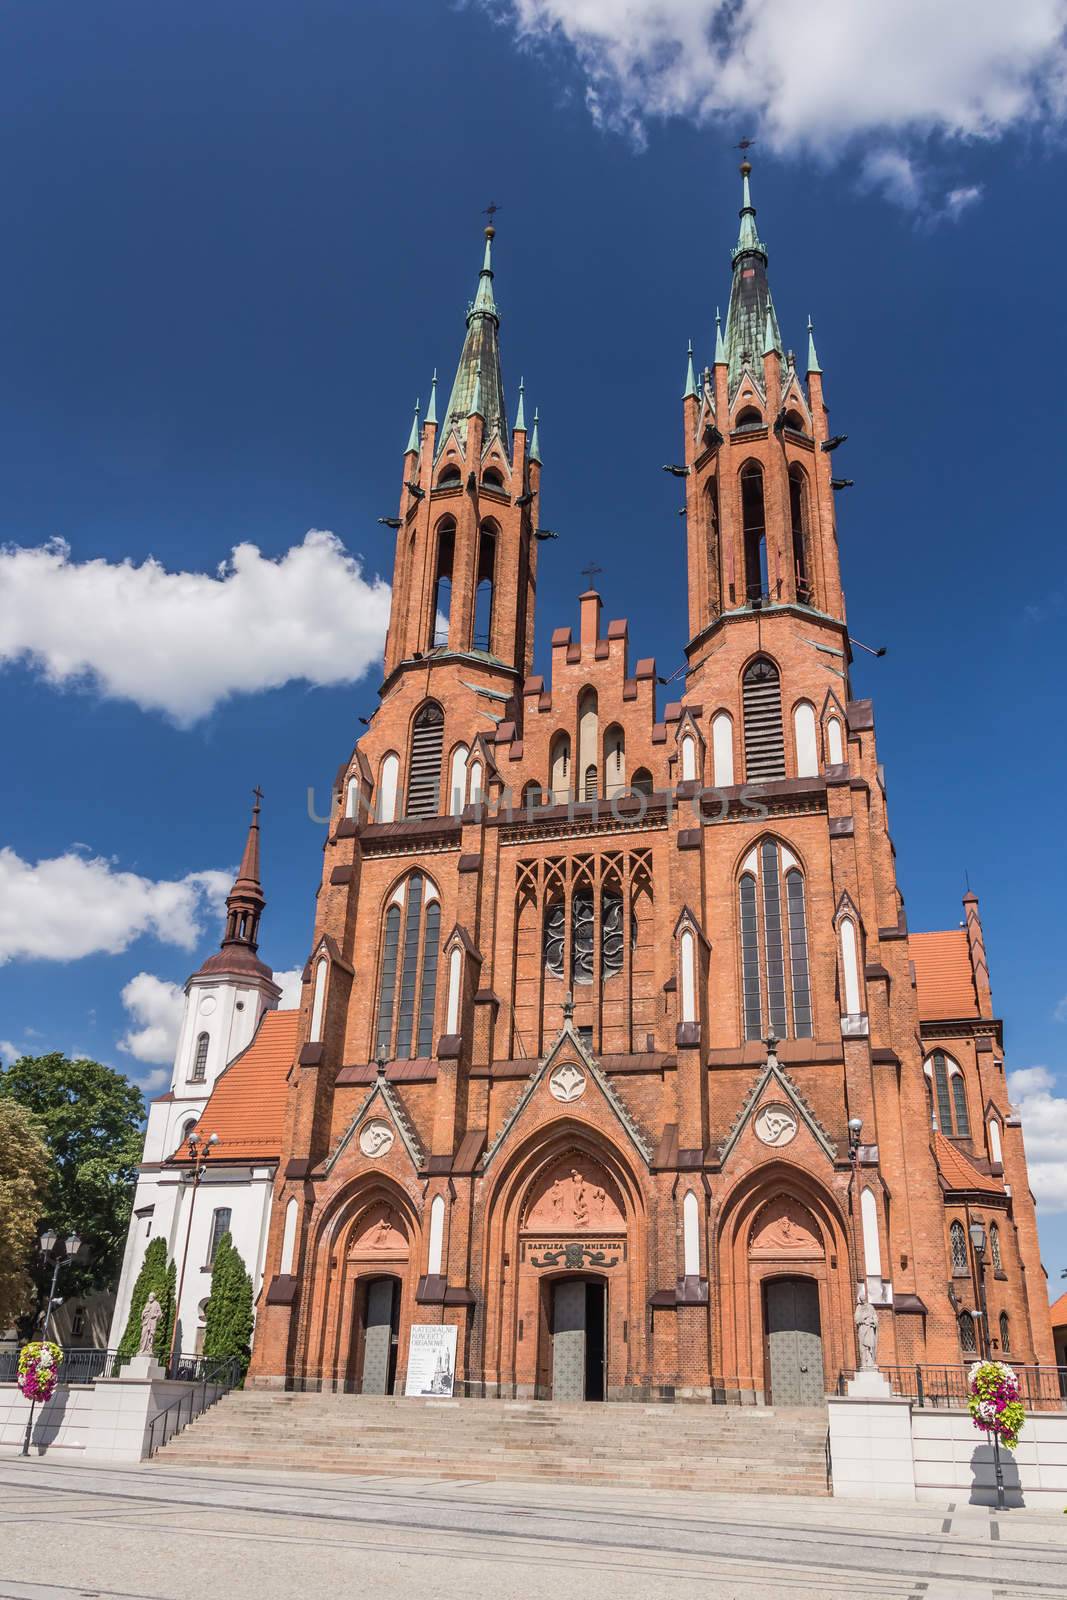 Cathedral Basilica of the Assumption of the Blessed Virgin Mary in Bialystok, Poland. Church consists of two structures - old church in late Renaissance style and new church in Neo-Gothic style.